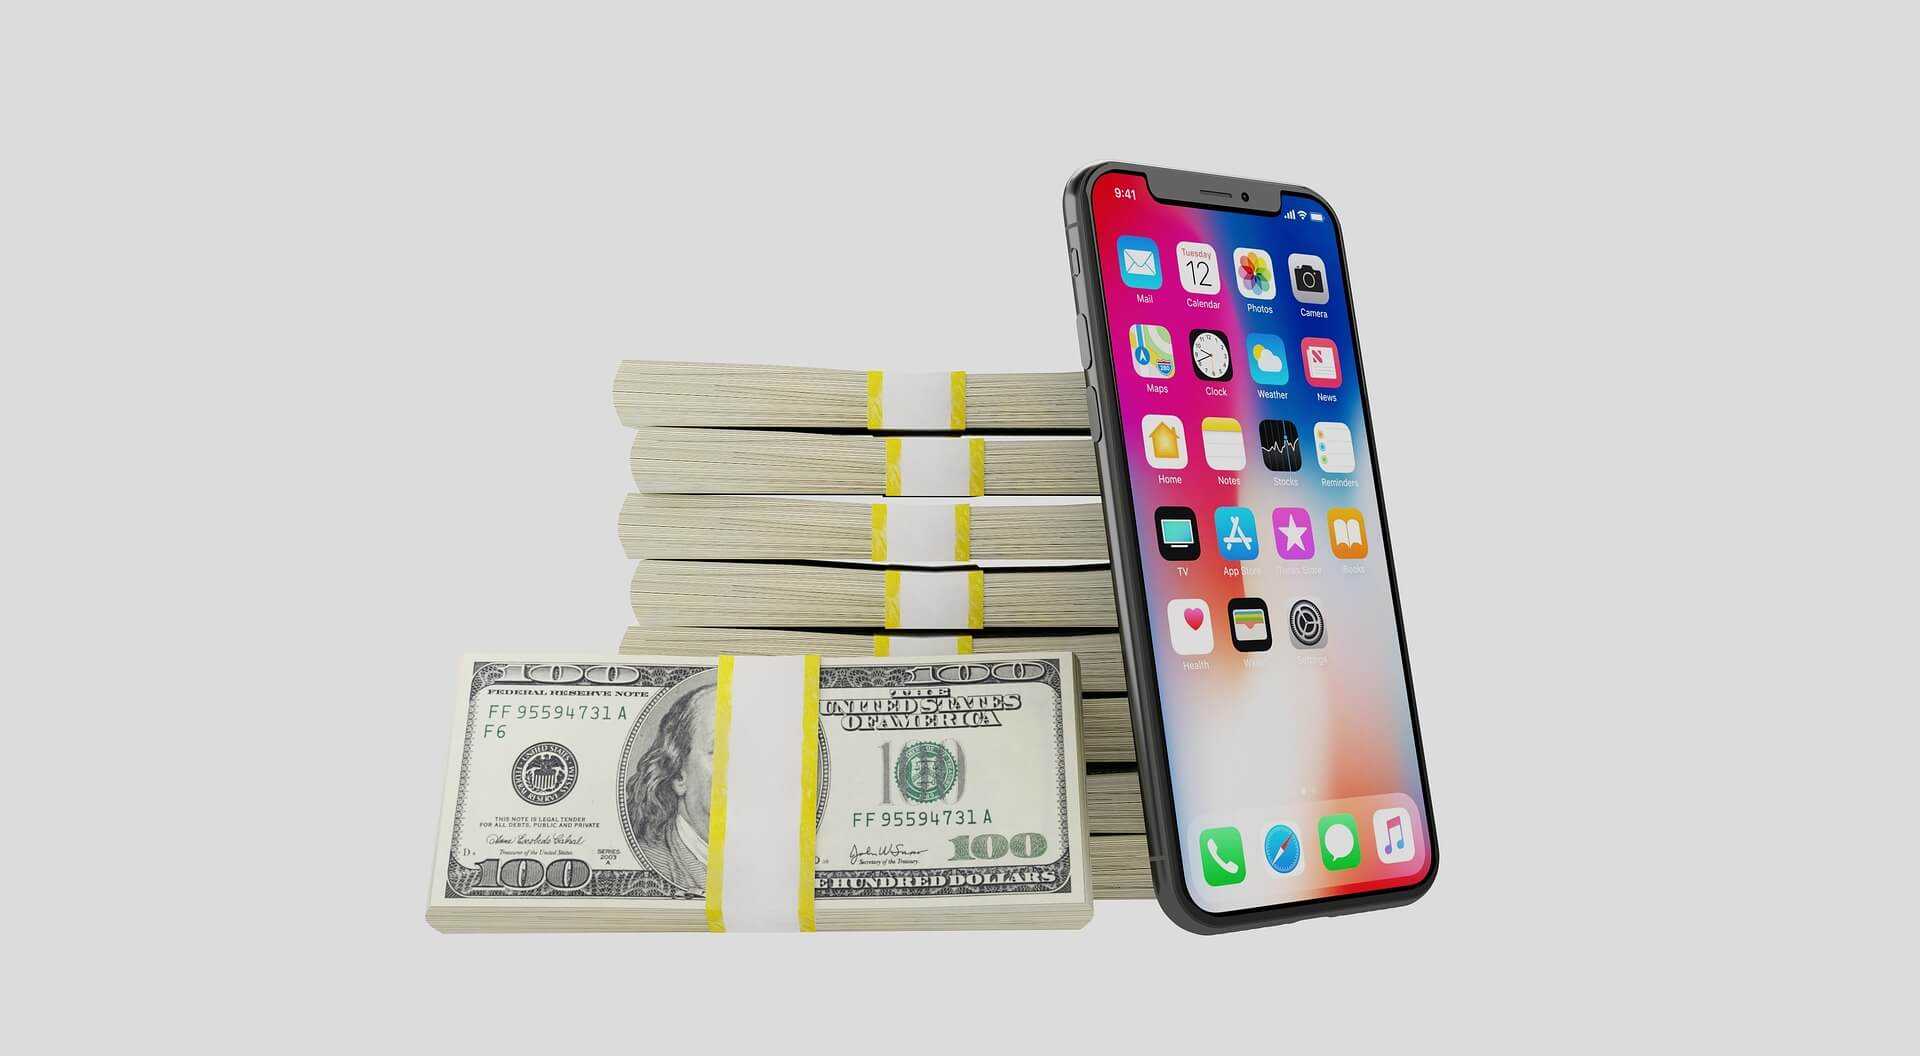 Smartphone displaying money-making apps-Making money online with phones